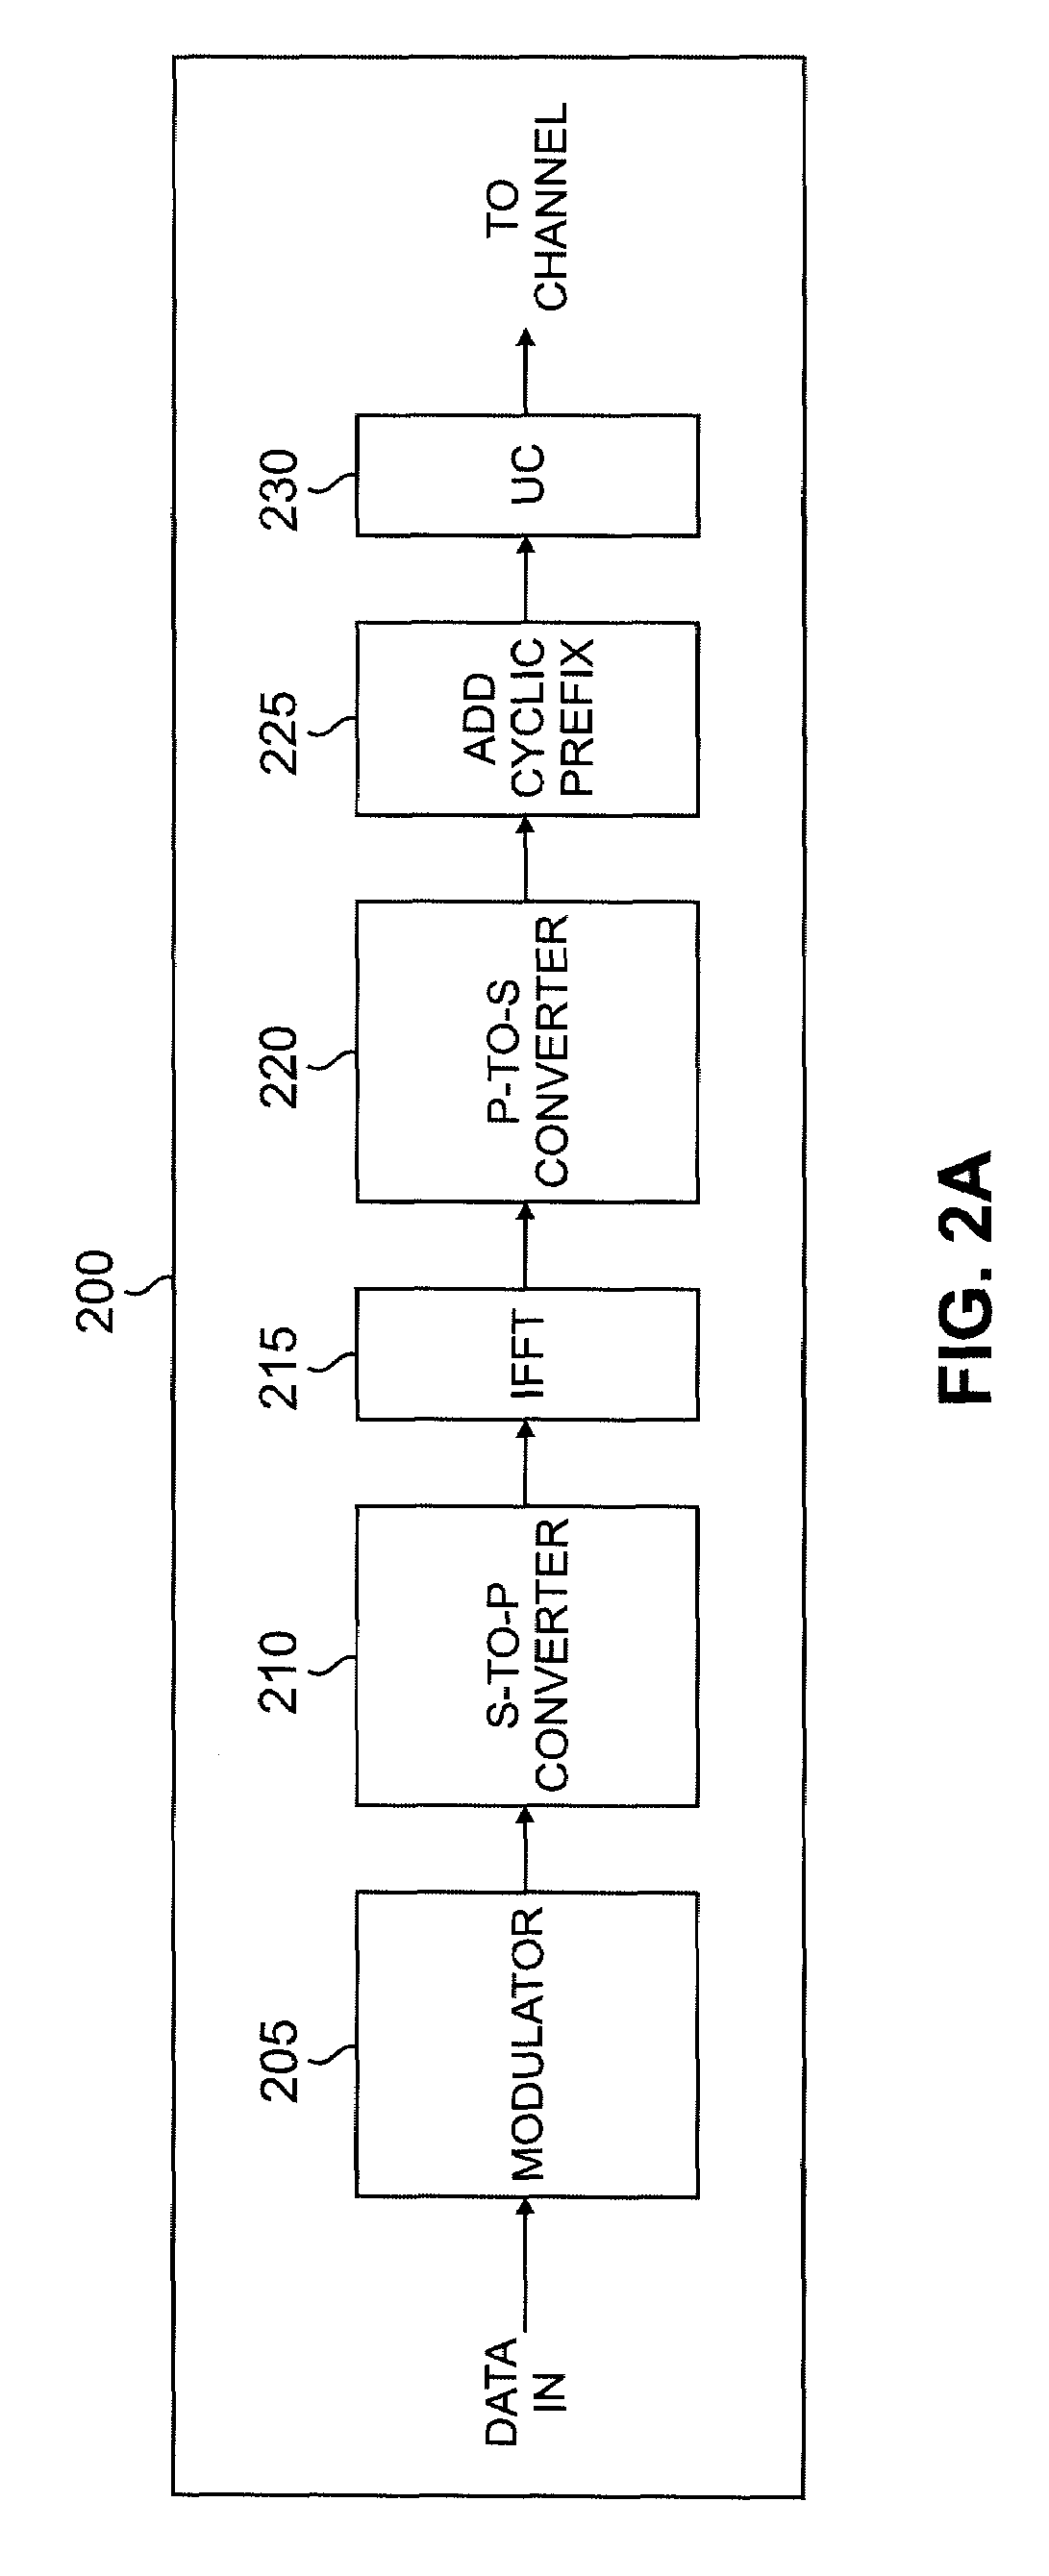 Method and System for Scheduling Users Based on User-Determined Ranks In A MIMO System